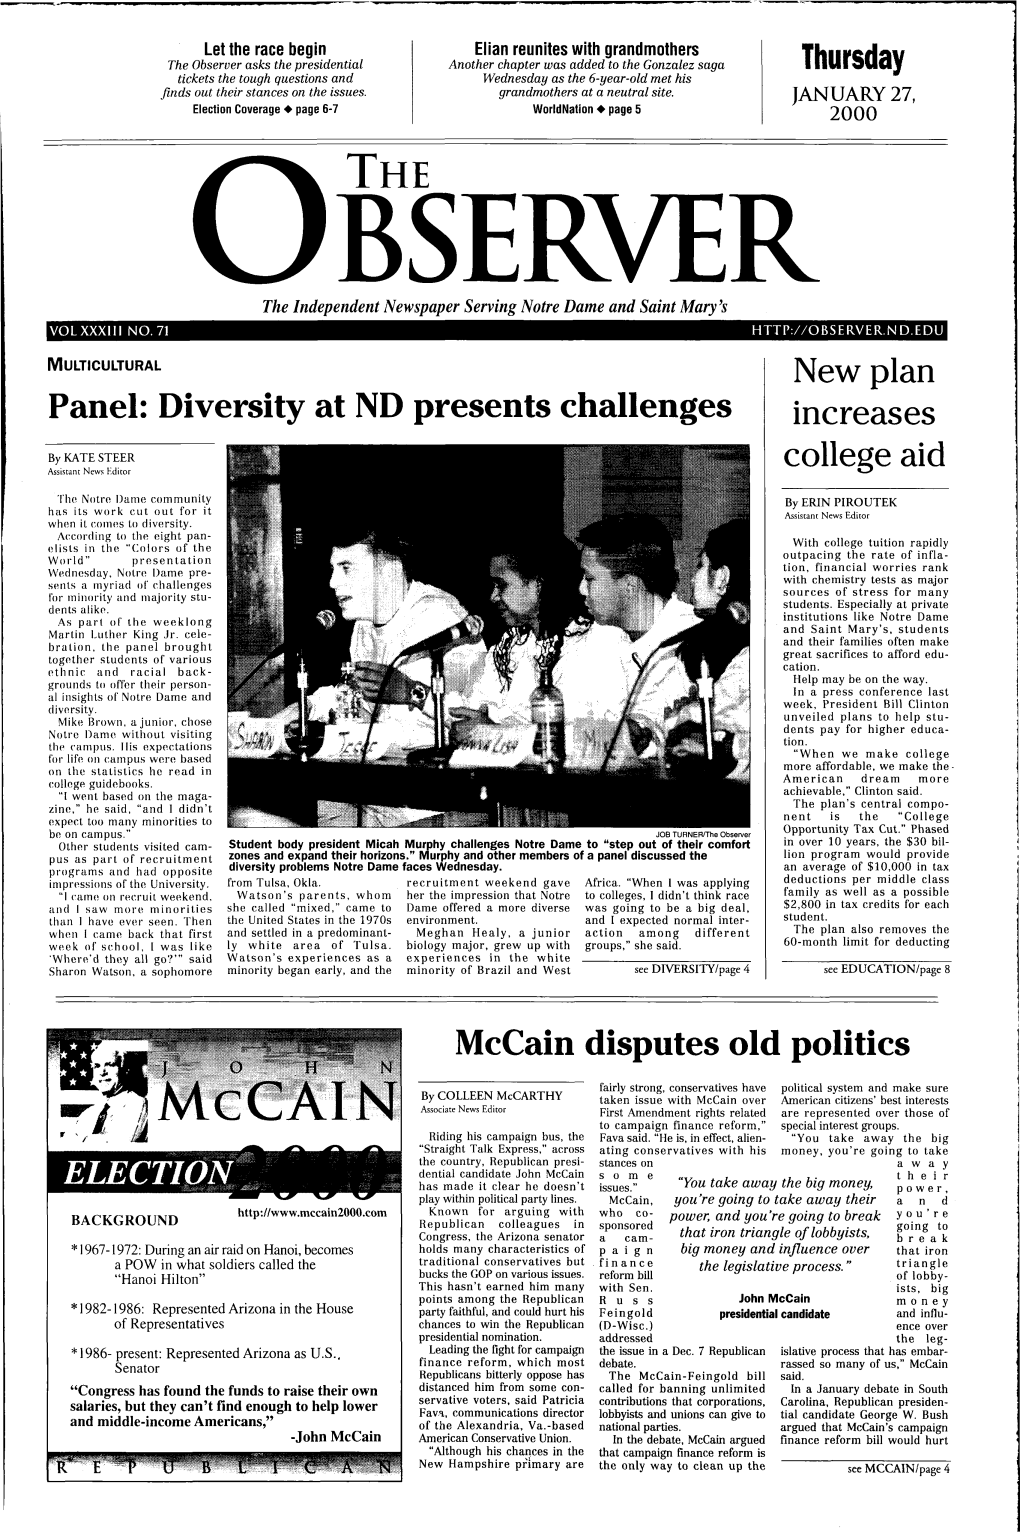 Diversity at ND Presents Challenges • Increases Mccain Disputes Old